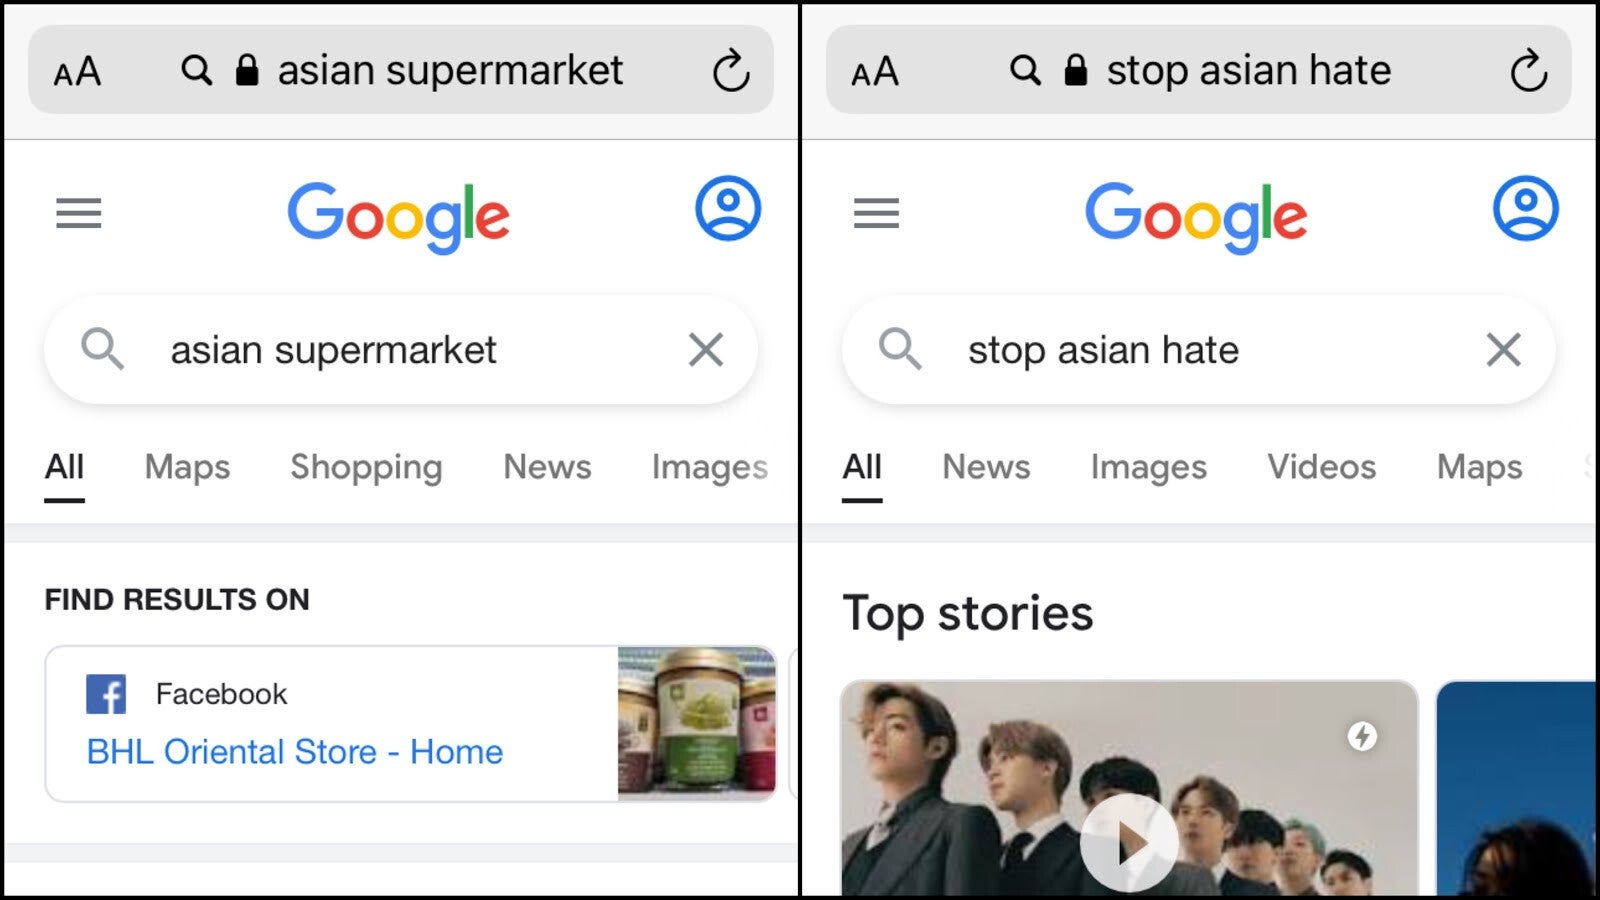 Success! - Apple’s Safari doesn’t allow people to search the word ‘Asian’, but why?